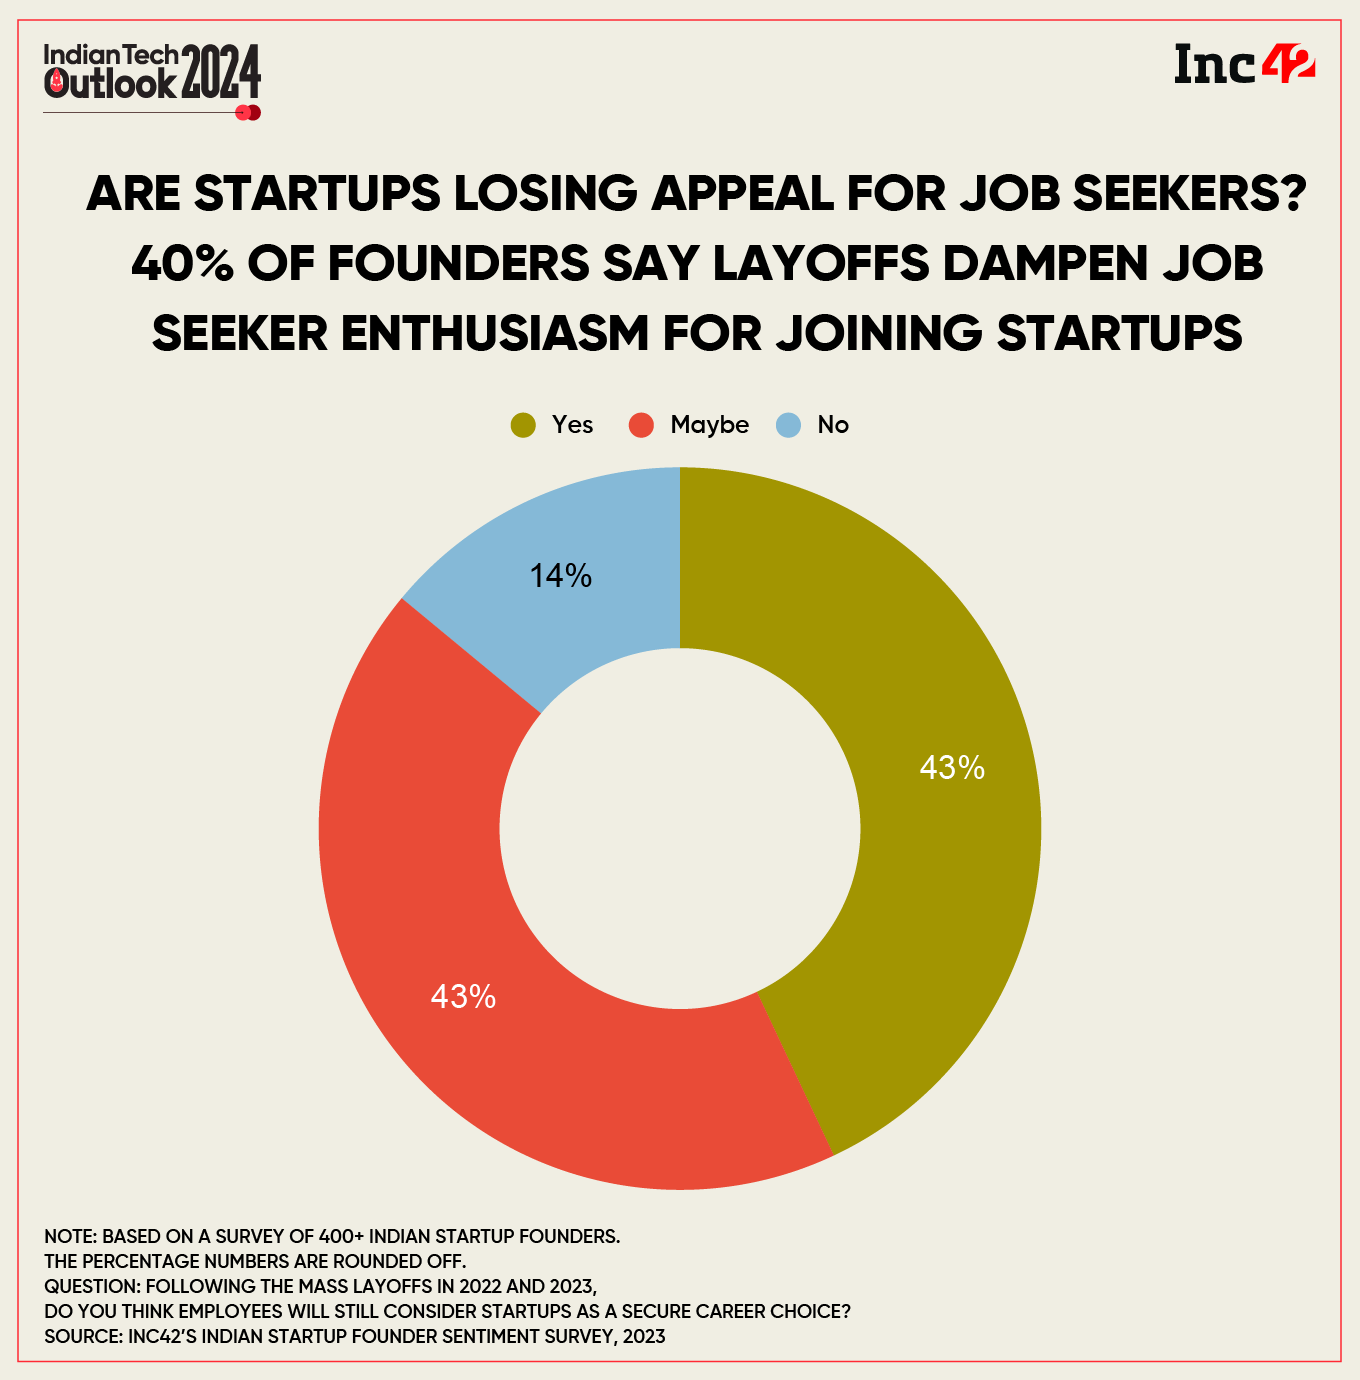 Startups Losing Appeal For Job Seekers? 40% Of Founders Say Layoffs Dampen Job Seeker Enthusiasm For Joining Startups